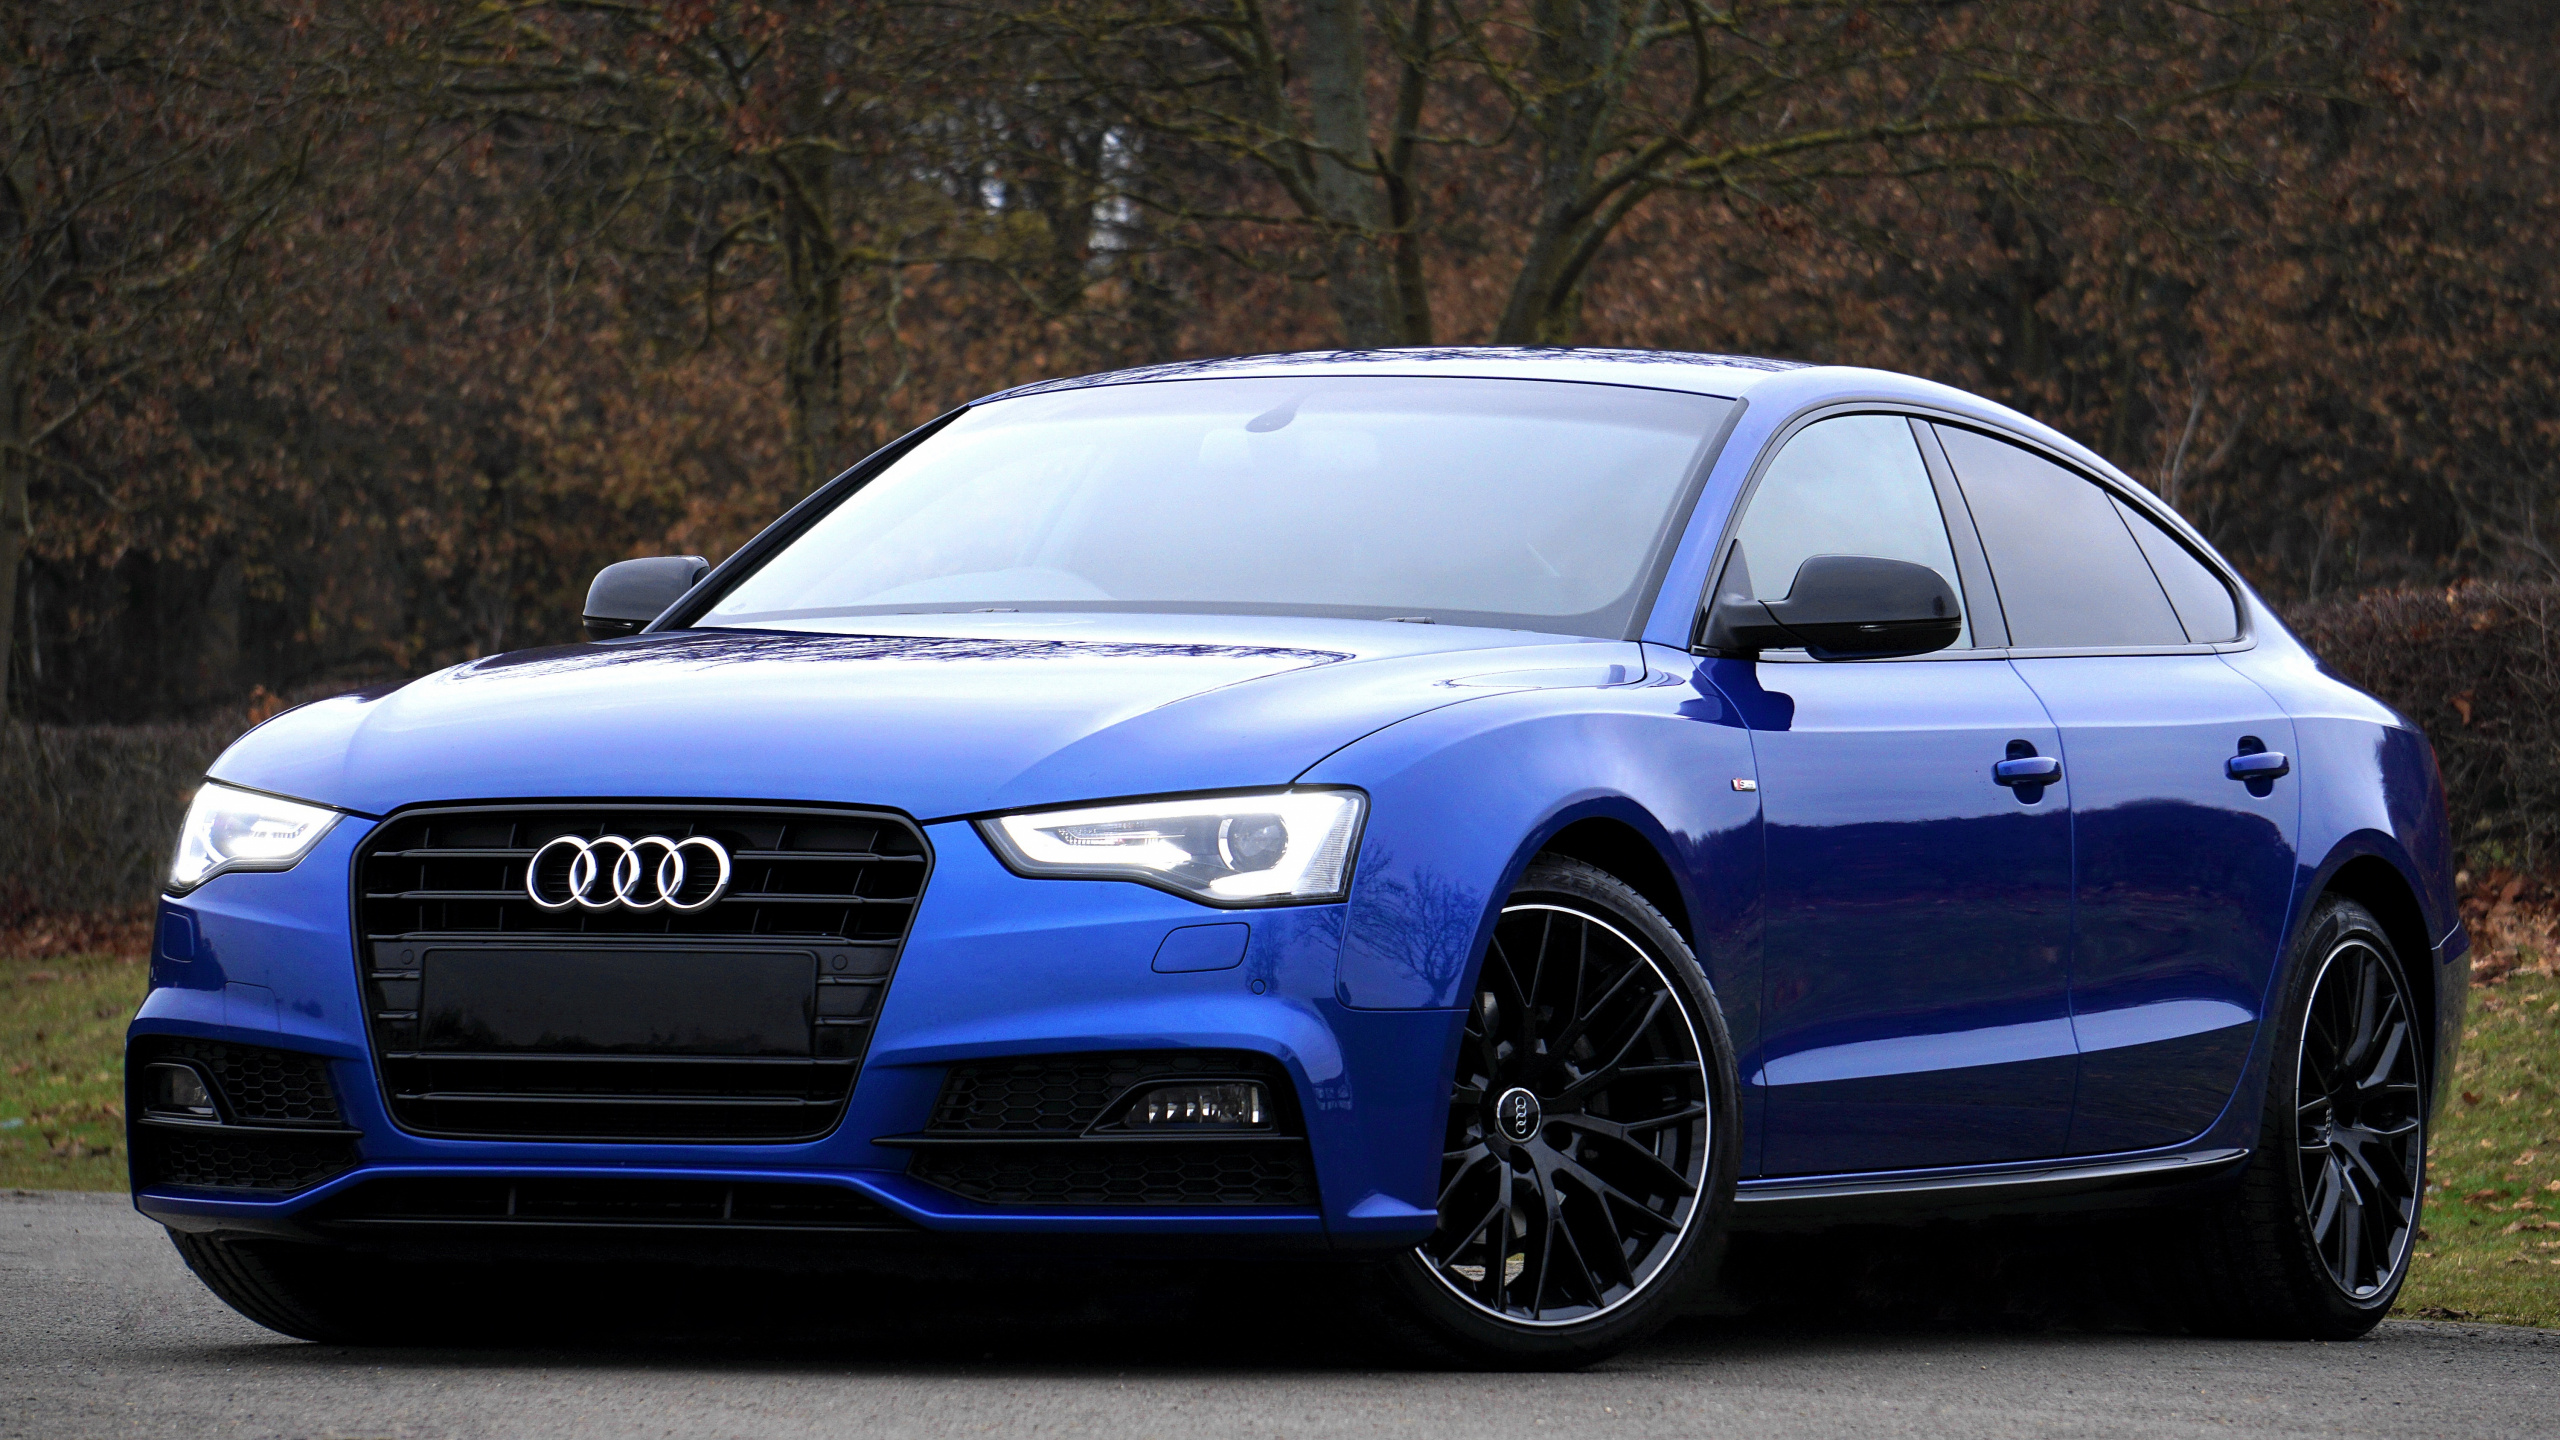 Blue Audi a 4 Coupe. Wallpaper in 2560x1440 Resolution